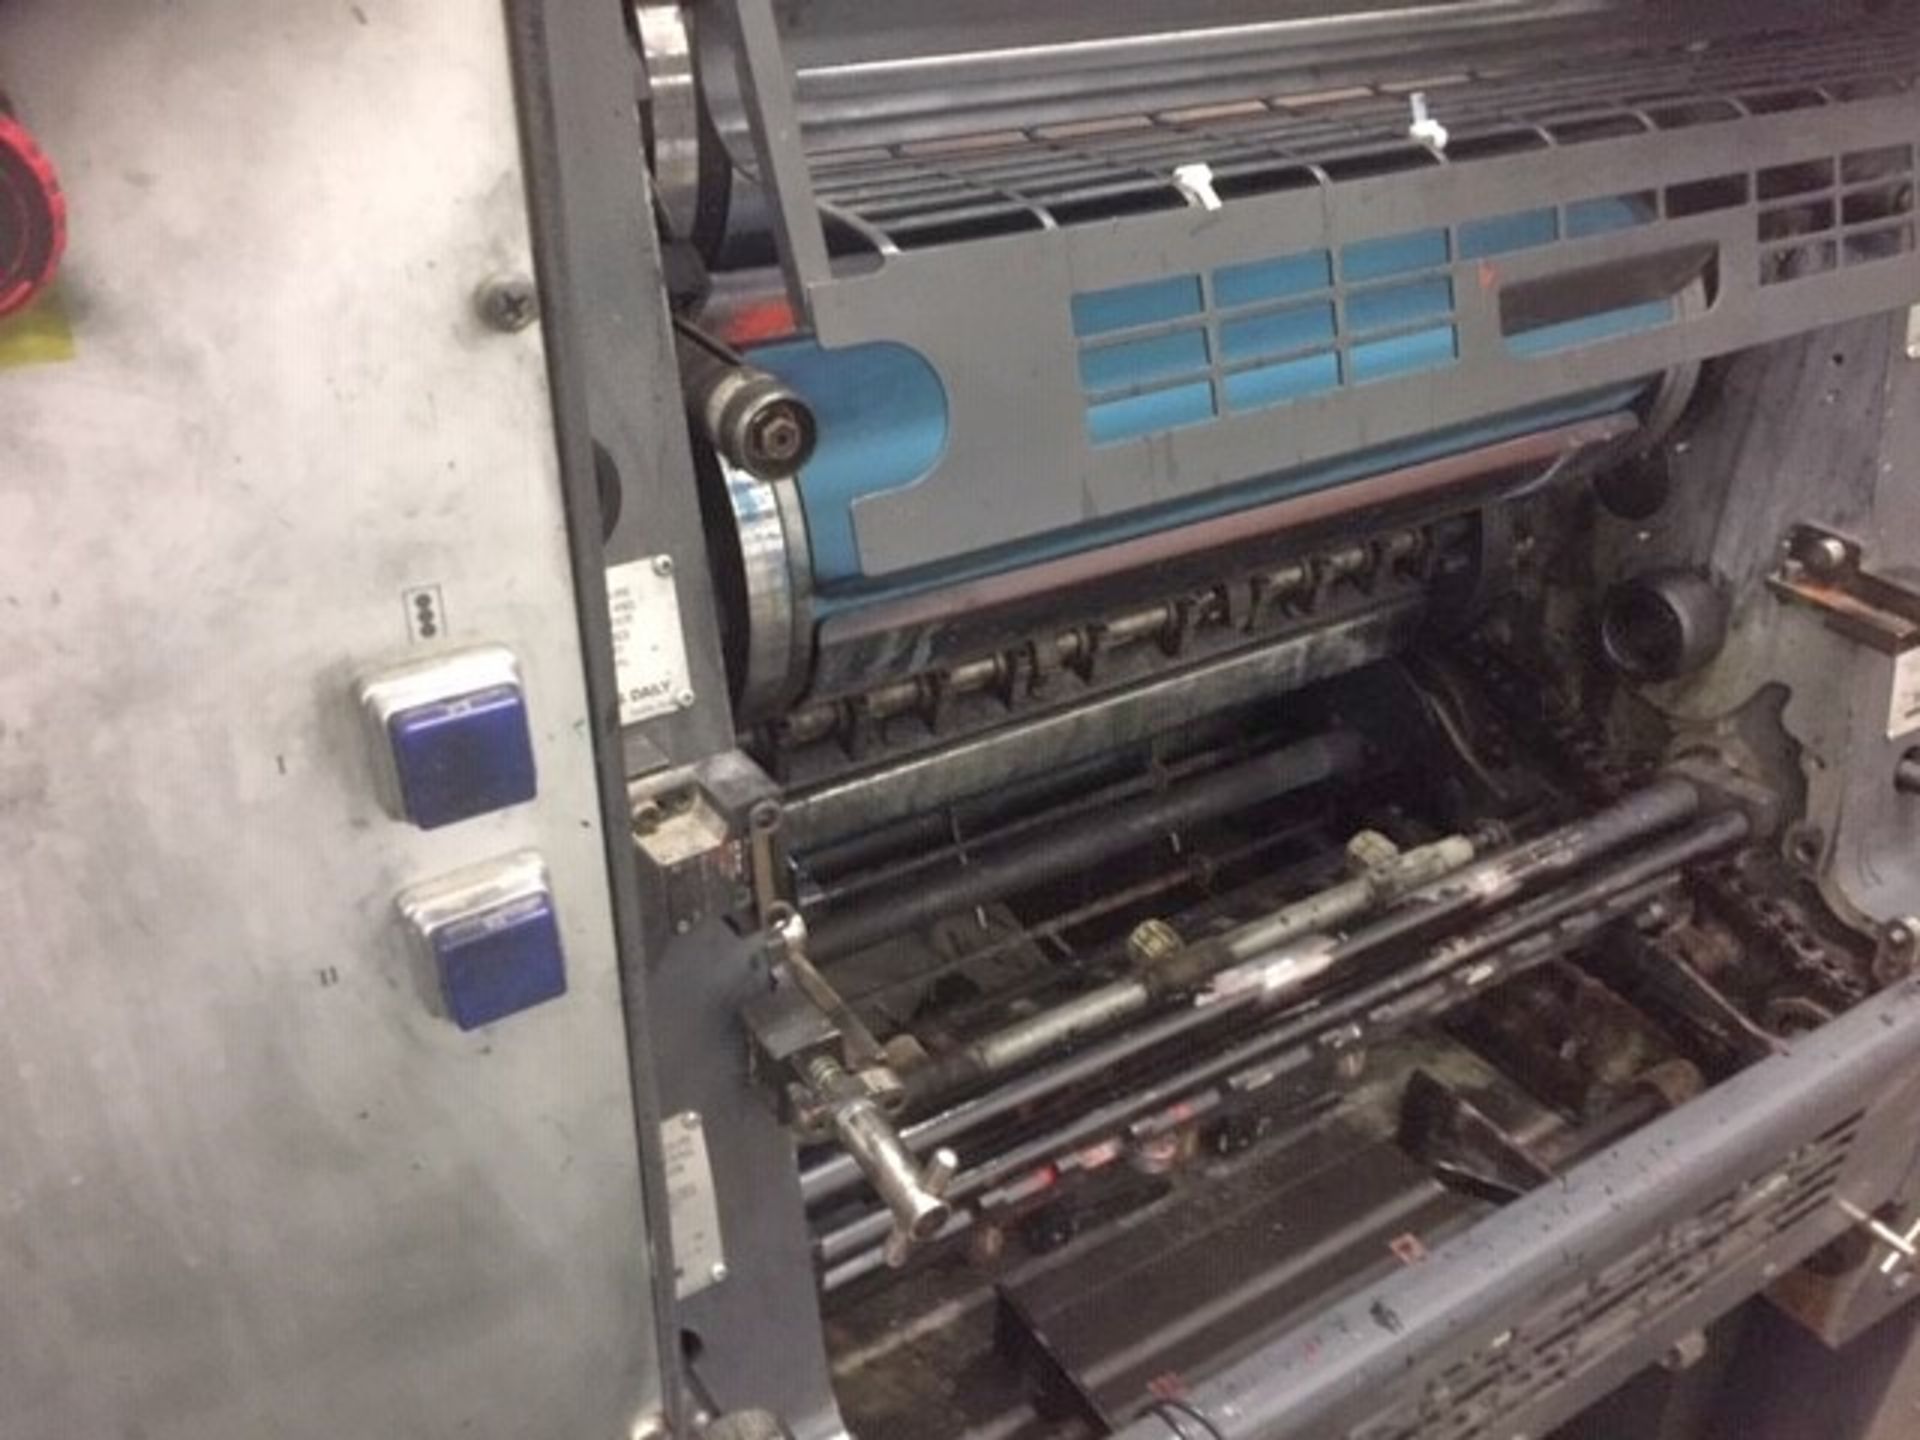 Heidelberg GTO52 ZP 2 Colour Offset Press, serial number 394 466, impressions – 54,984,889 (this lot - Image 10 of 10